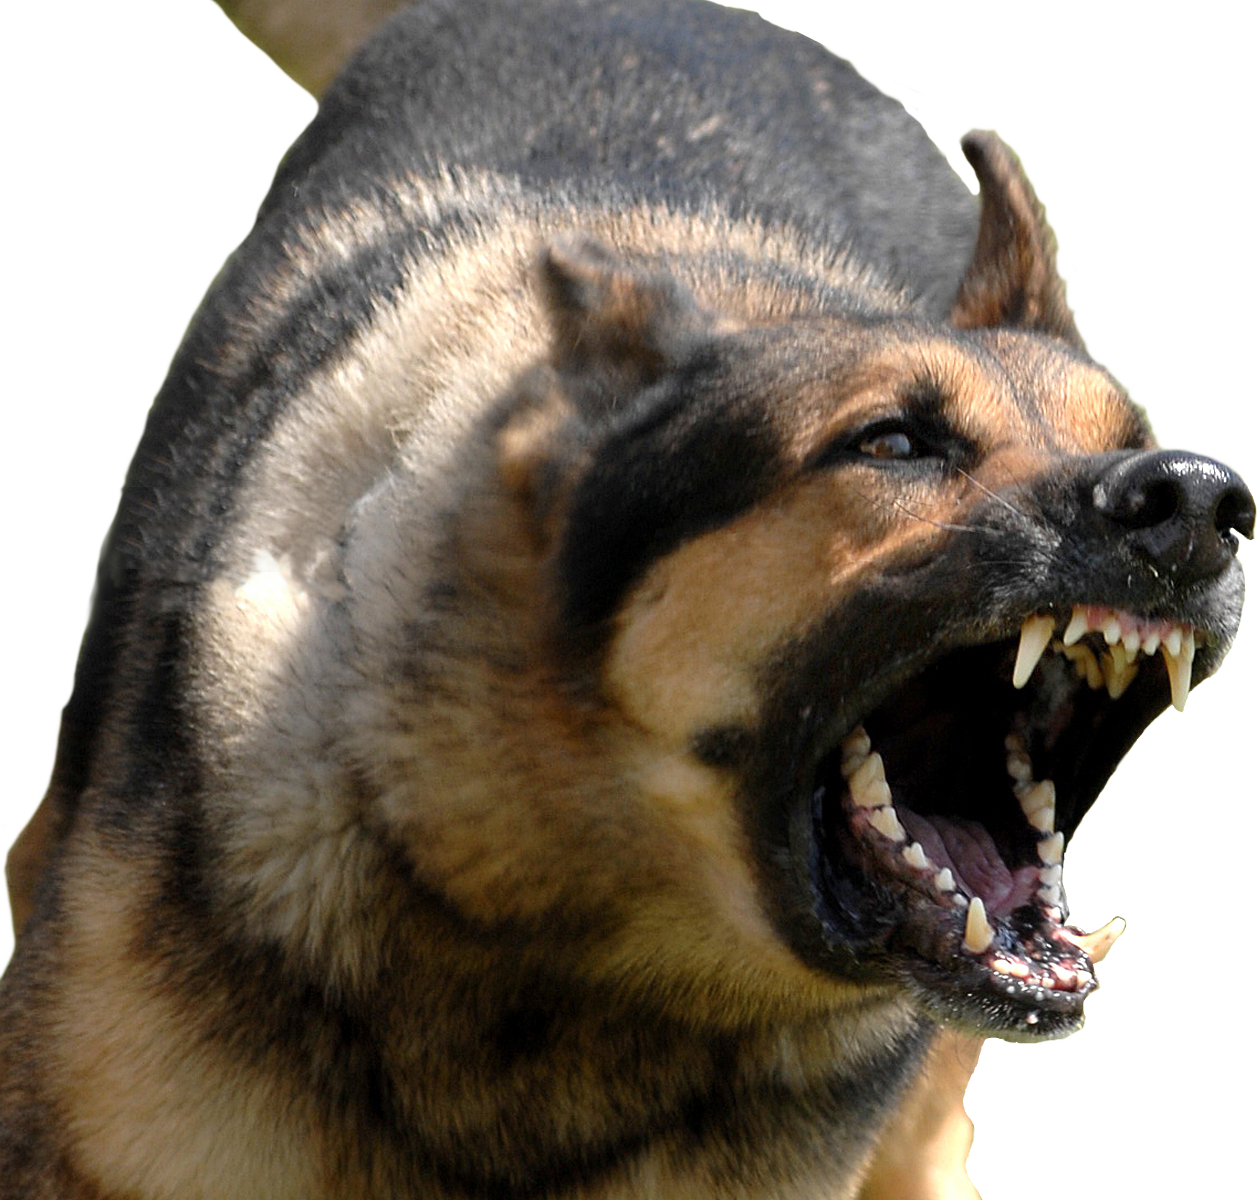 angry_dog_transparent_bg_by_qubodup-d79igx4.png